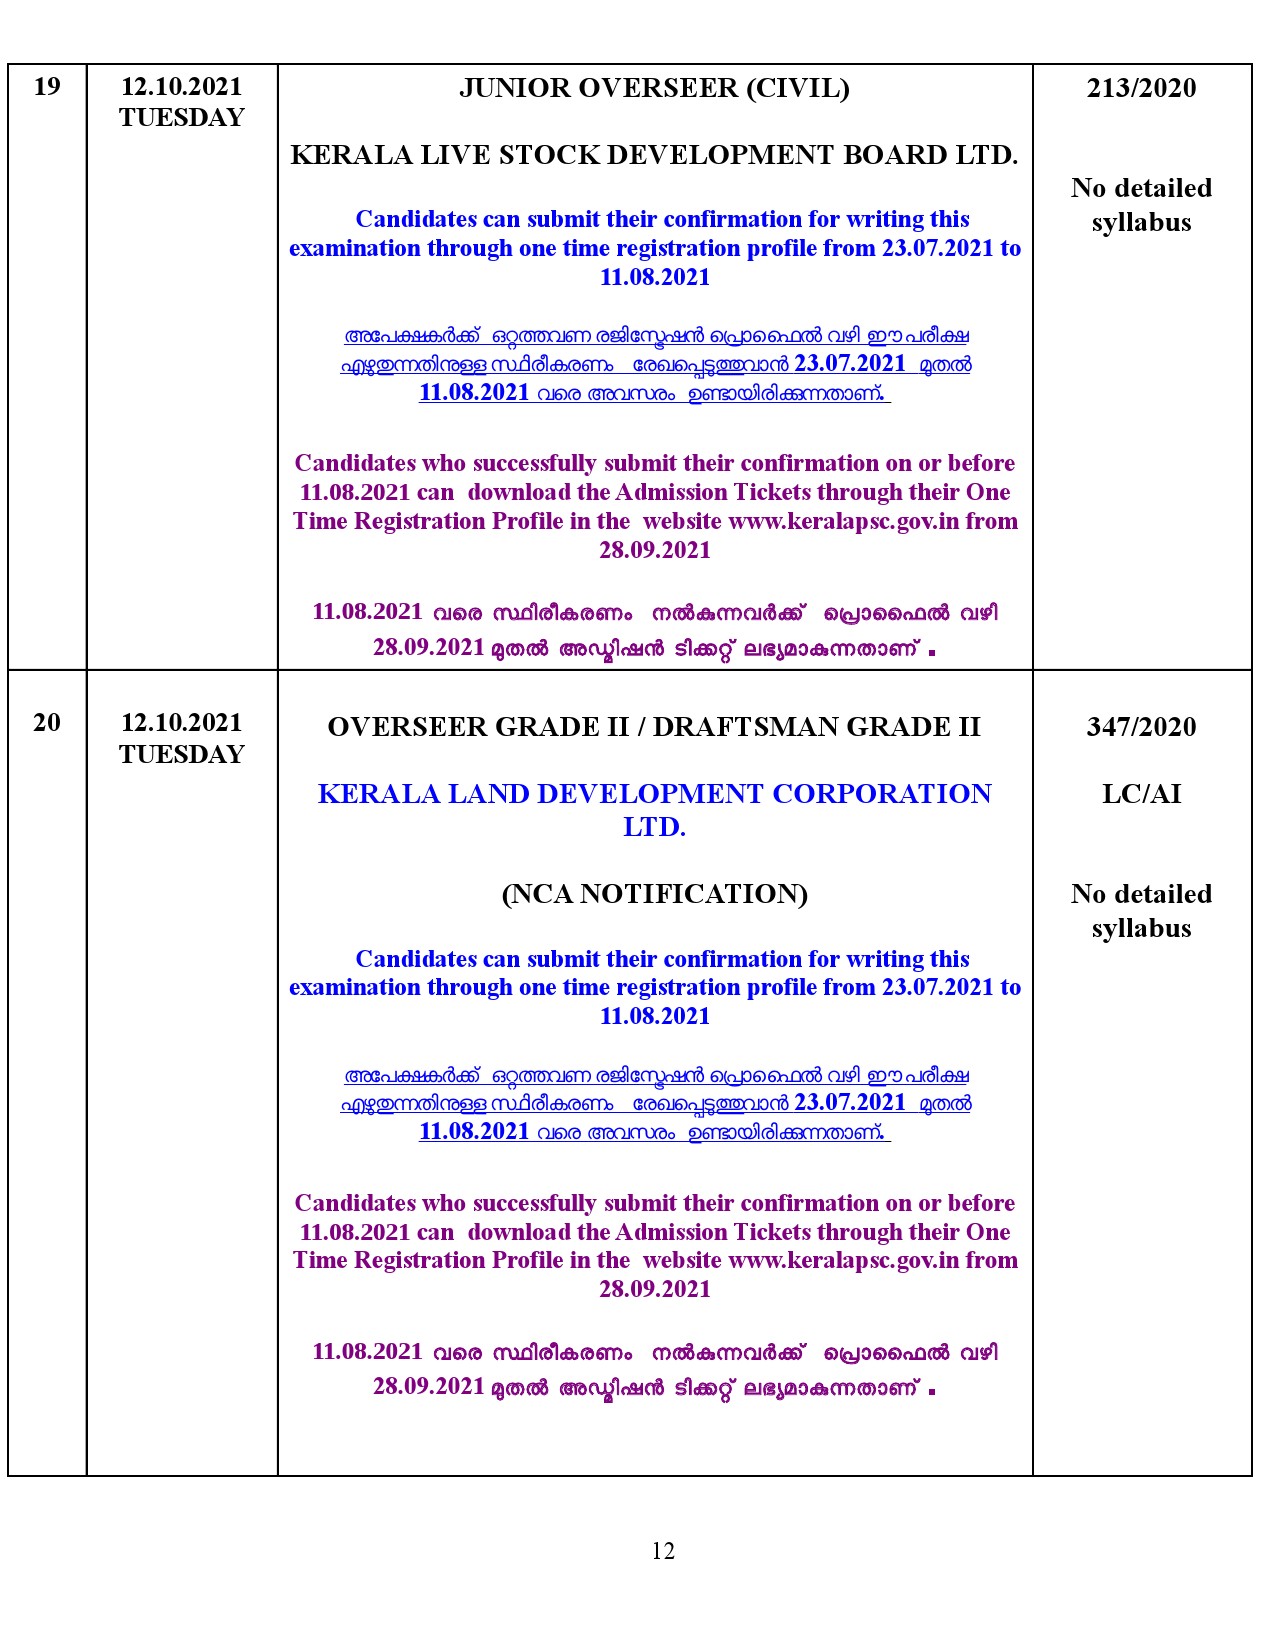 KPSC Examination Programme For The Month Of October 2021 - Notification Image 12